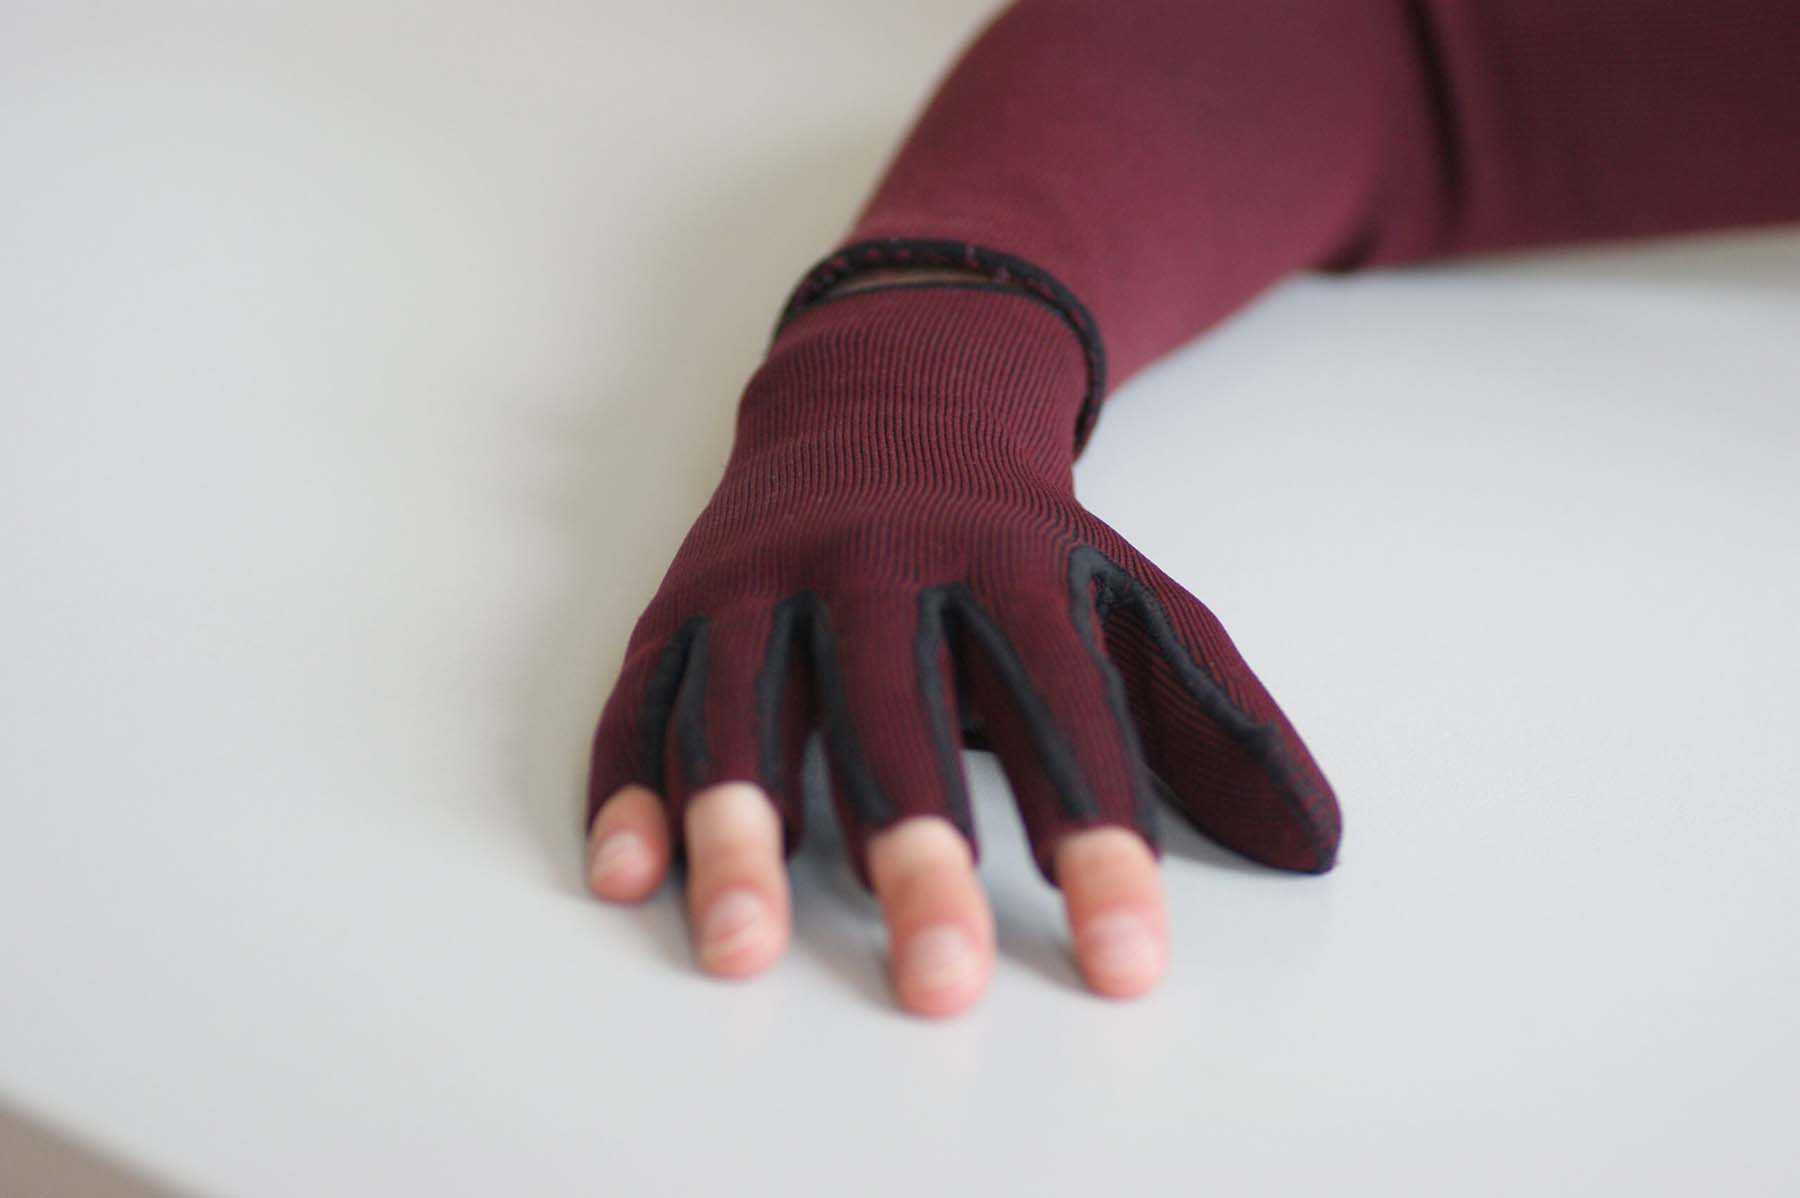 Photo of pressure garments on hand and arm